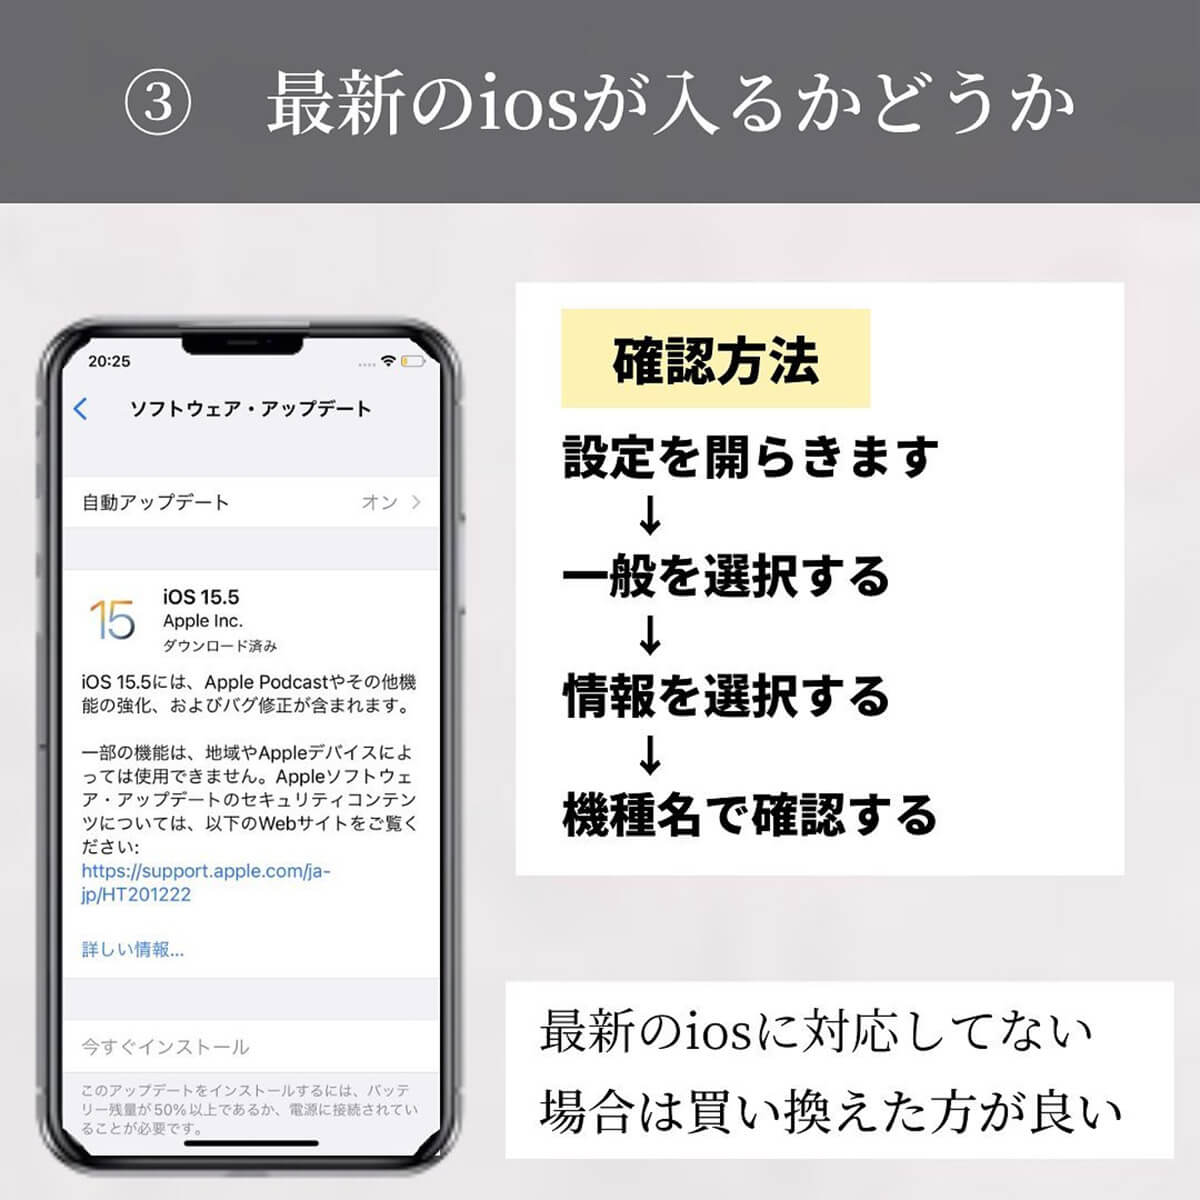 iPhoneの買い替え時を確認する方法3